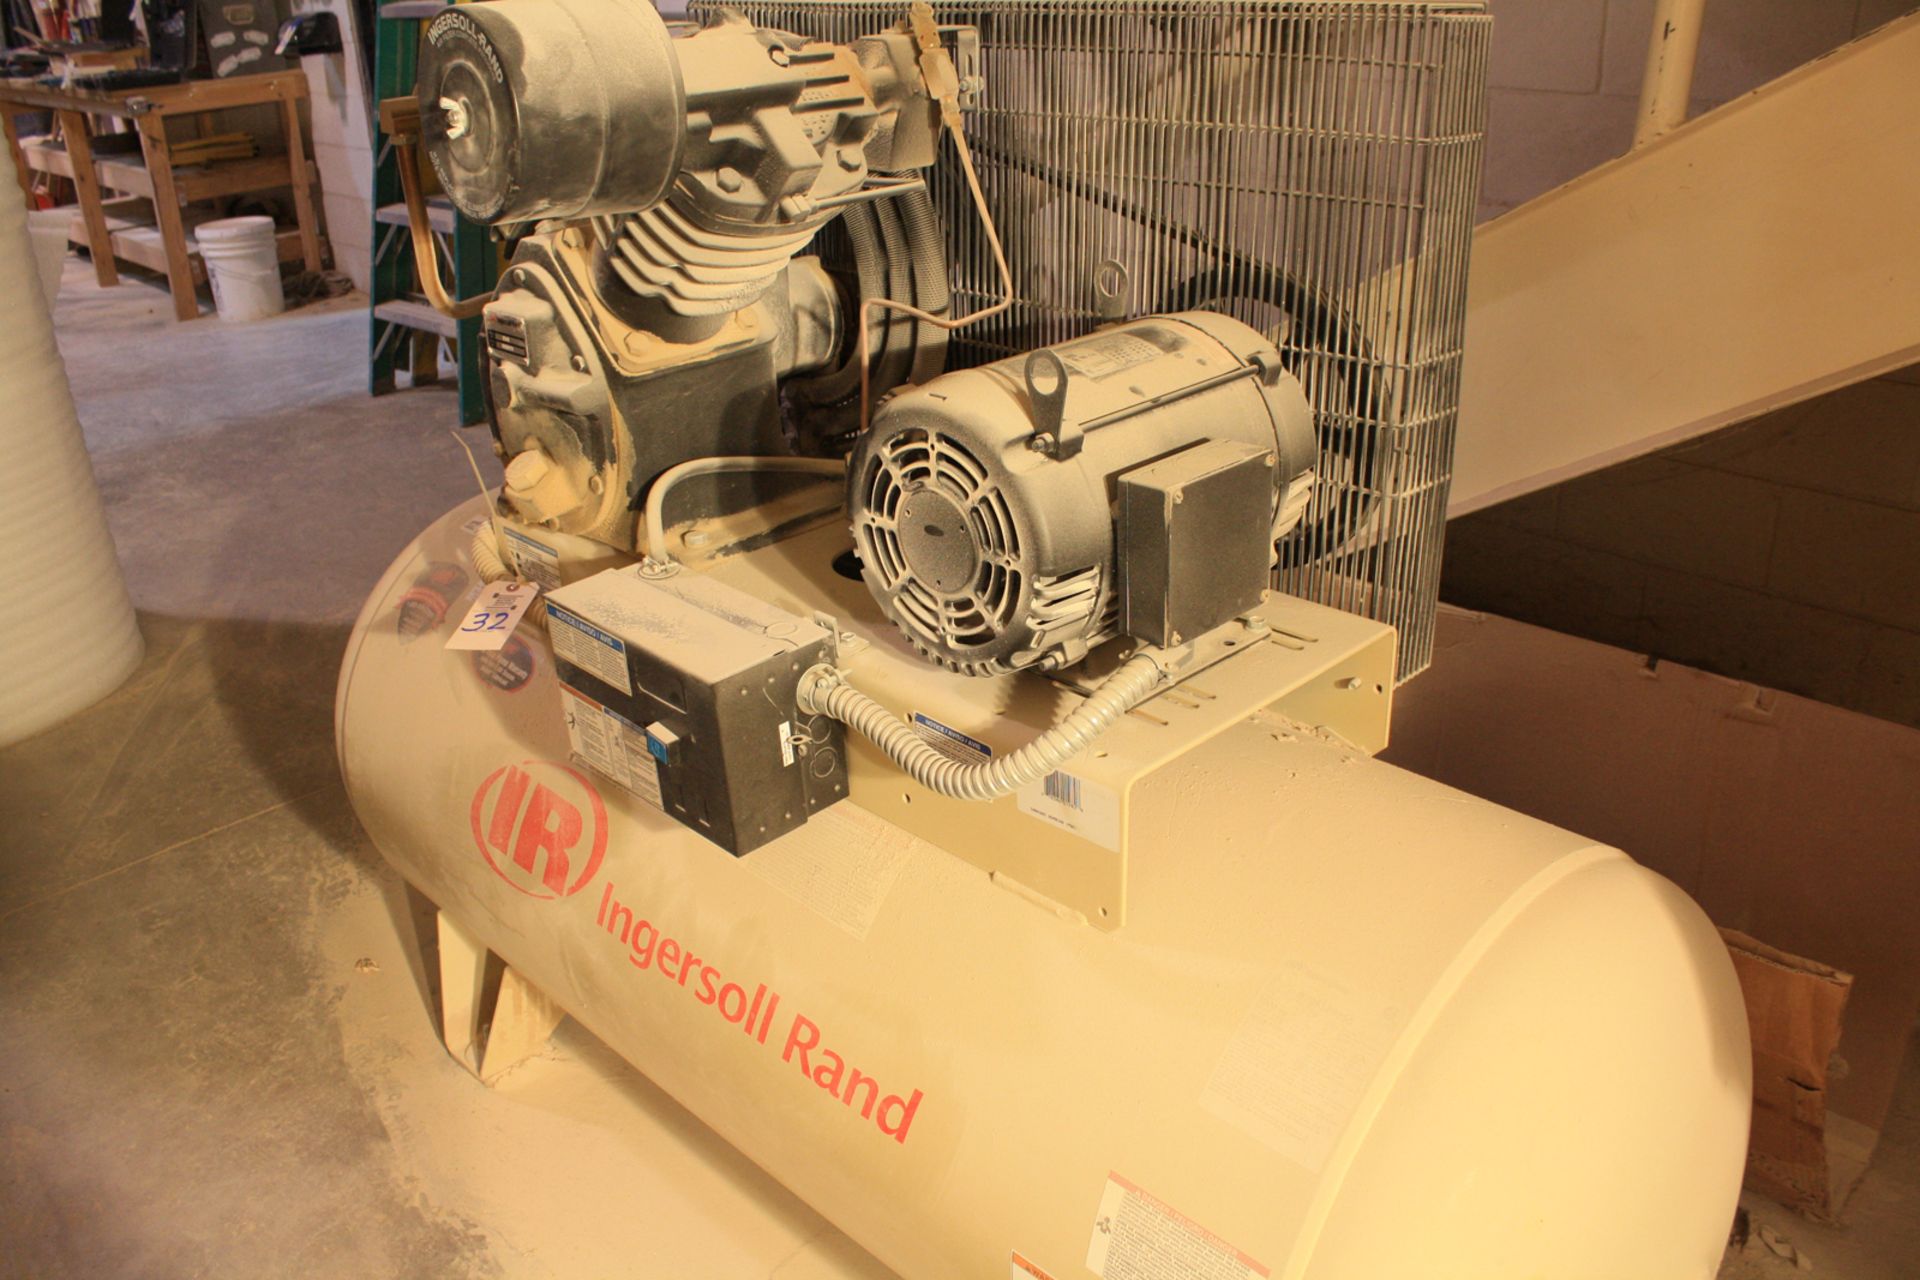 Ingersoll-Rand Air Compressor 10HP/7.5 3 phase Model #2545 Serial #7050770